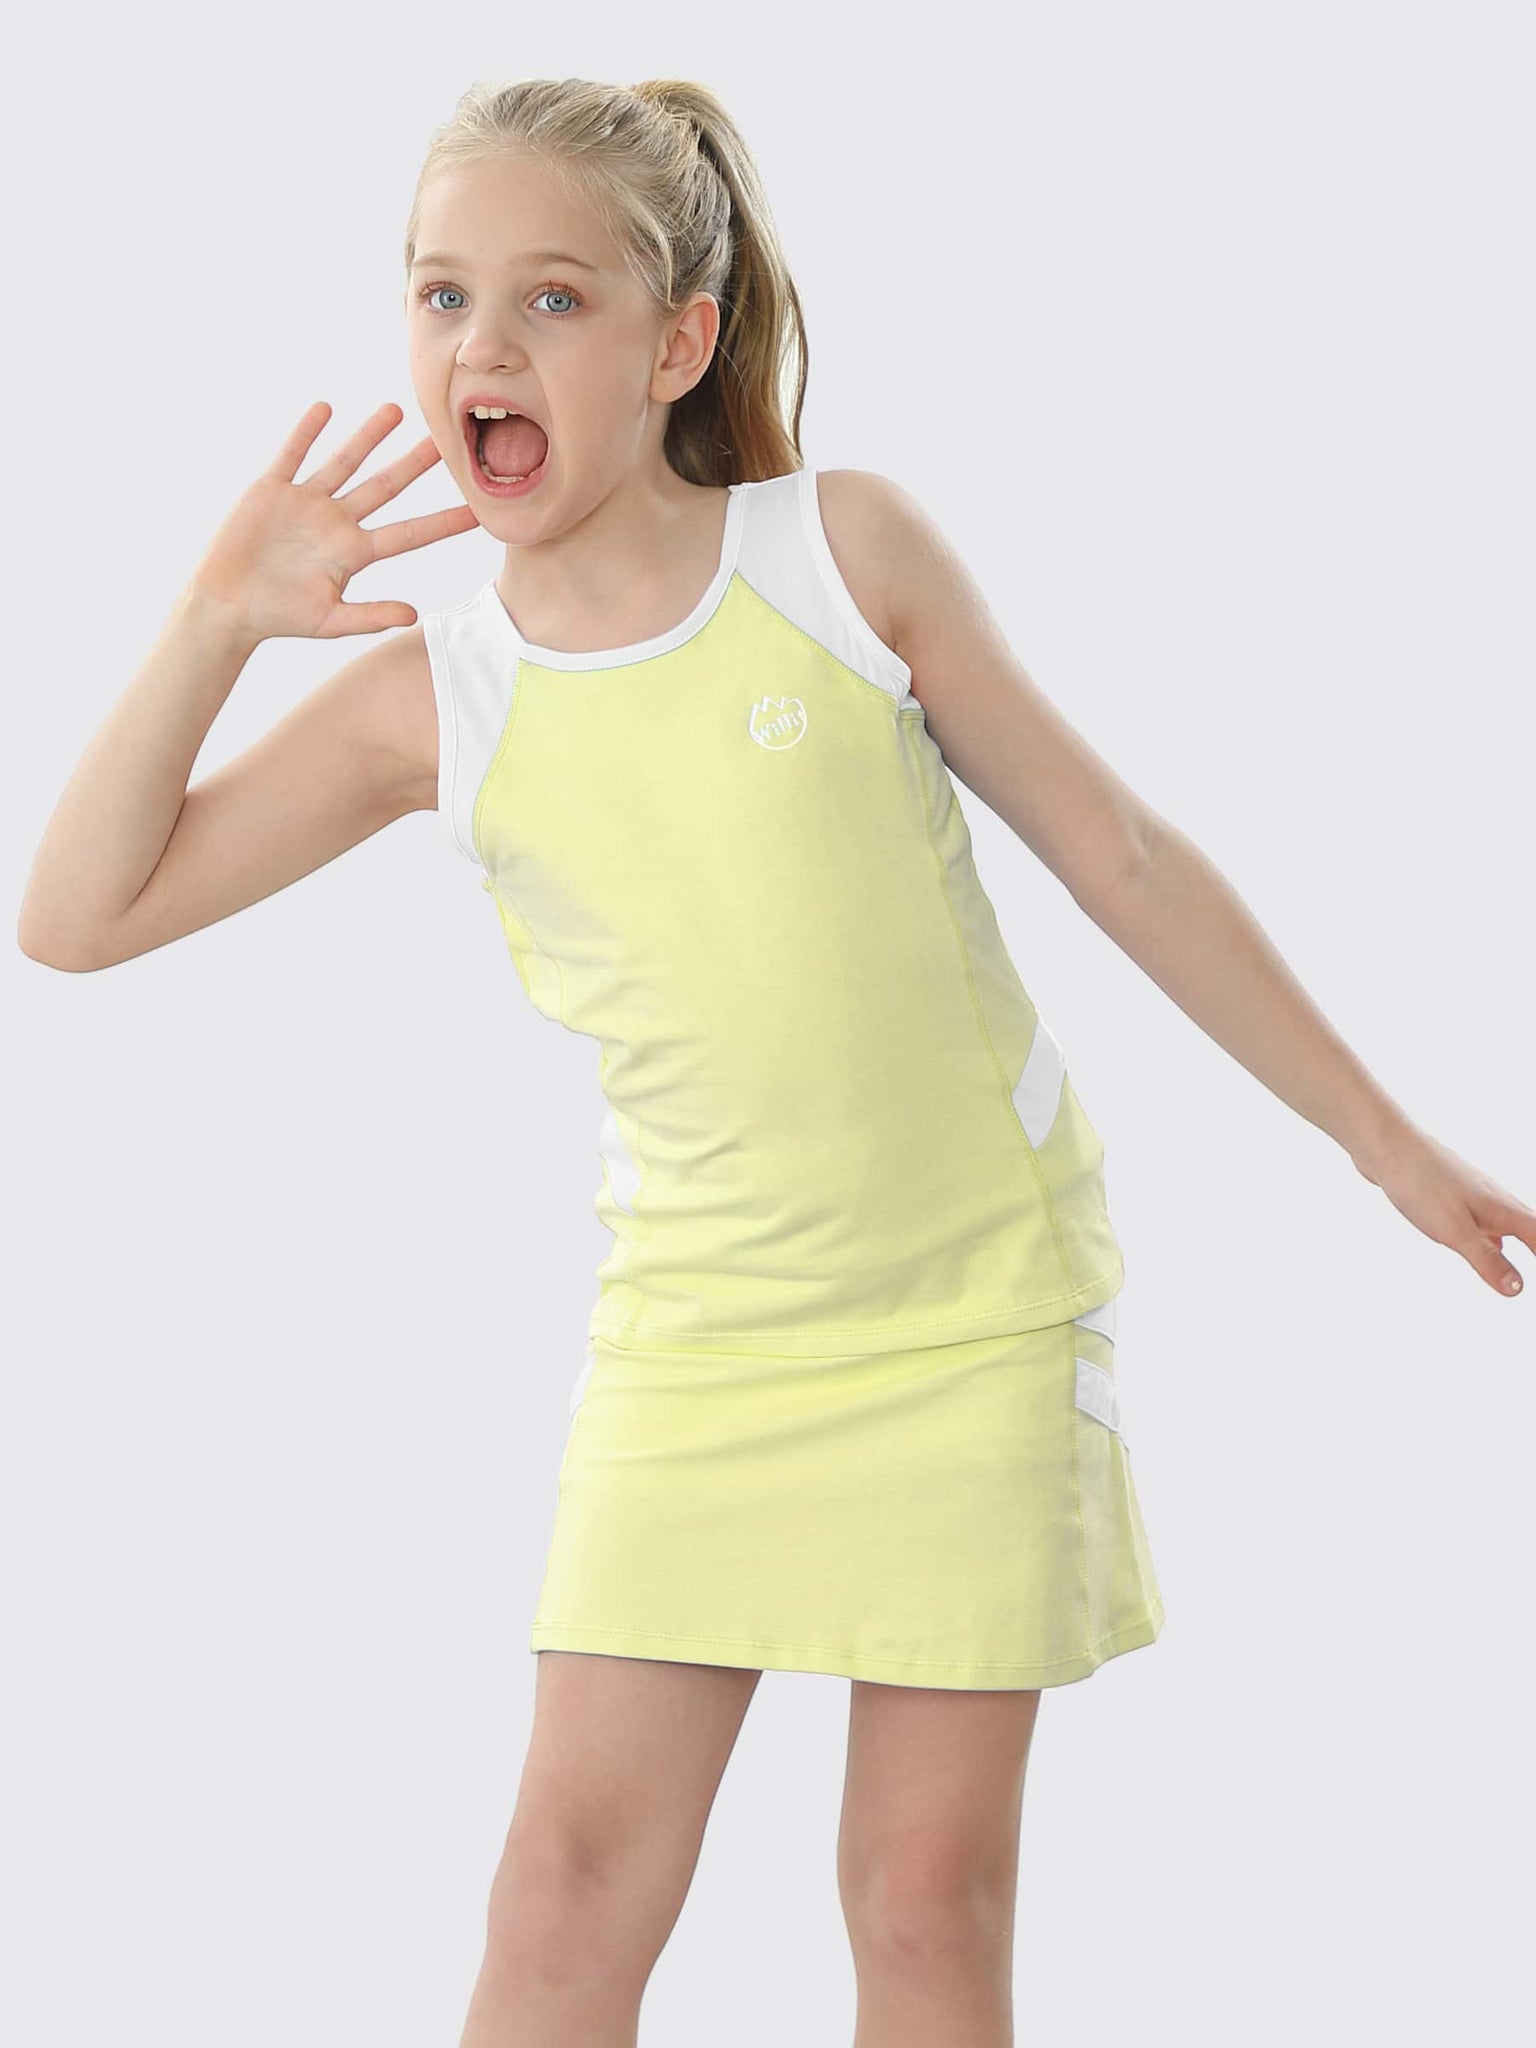 Willit Girls' Tennis Outfit_Yellow_model1